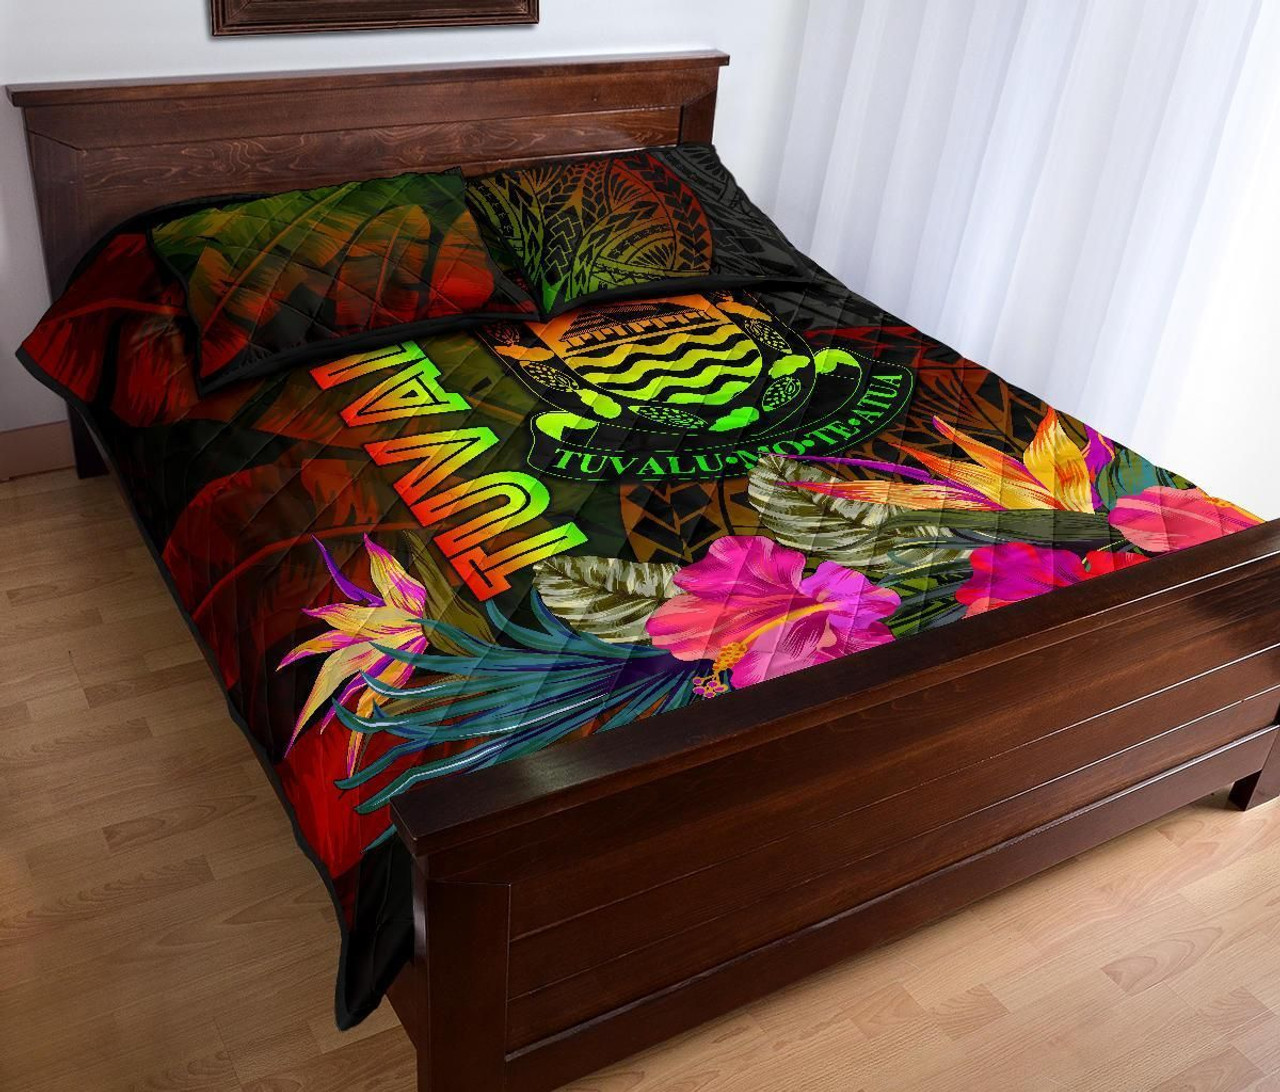 Tuvalu Polynesian Quilt Bed Set - Hibiscus and Banana Leaves 3